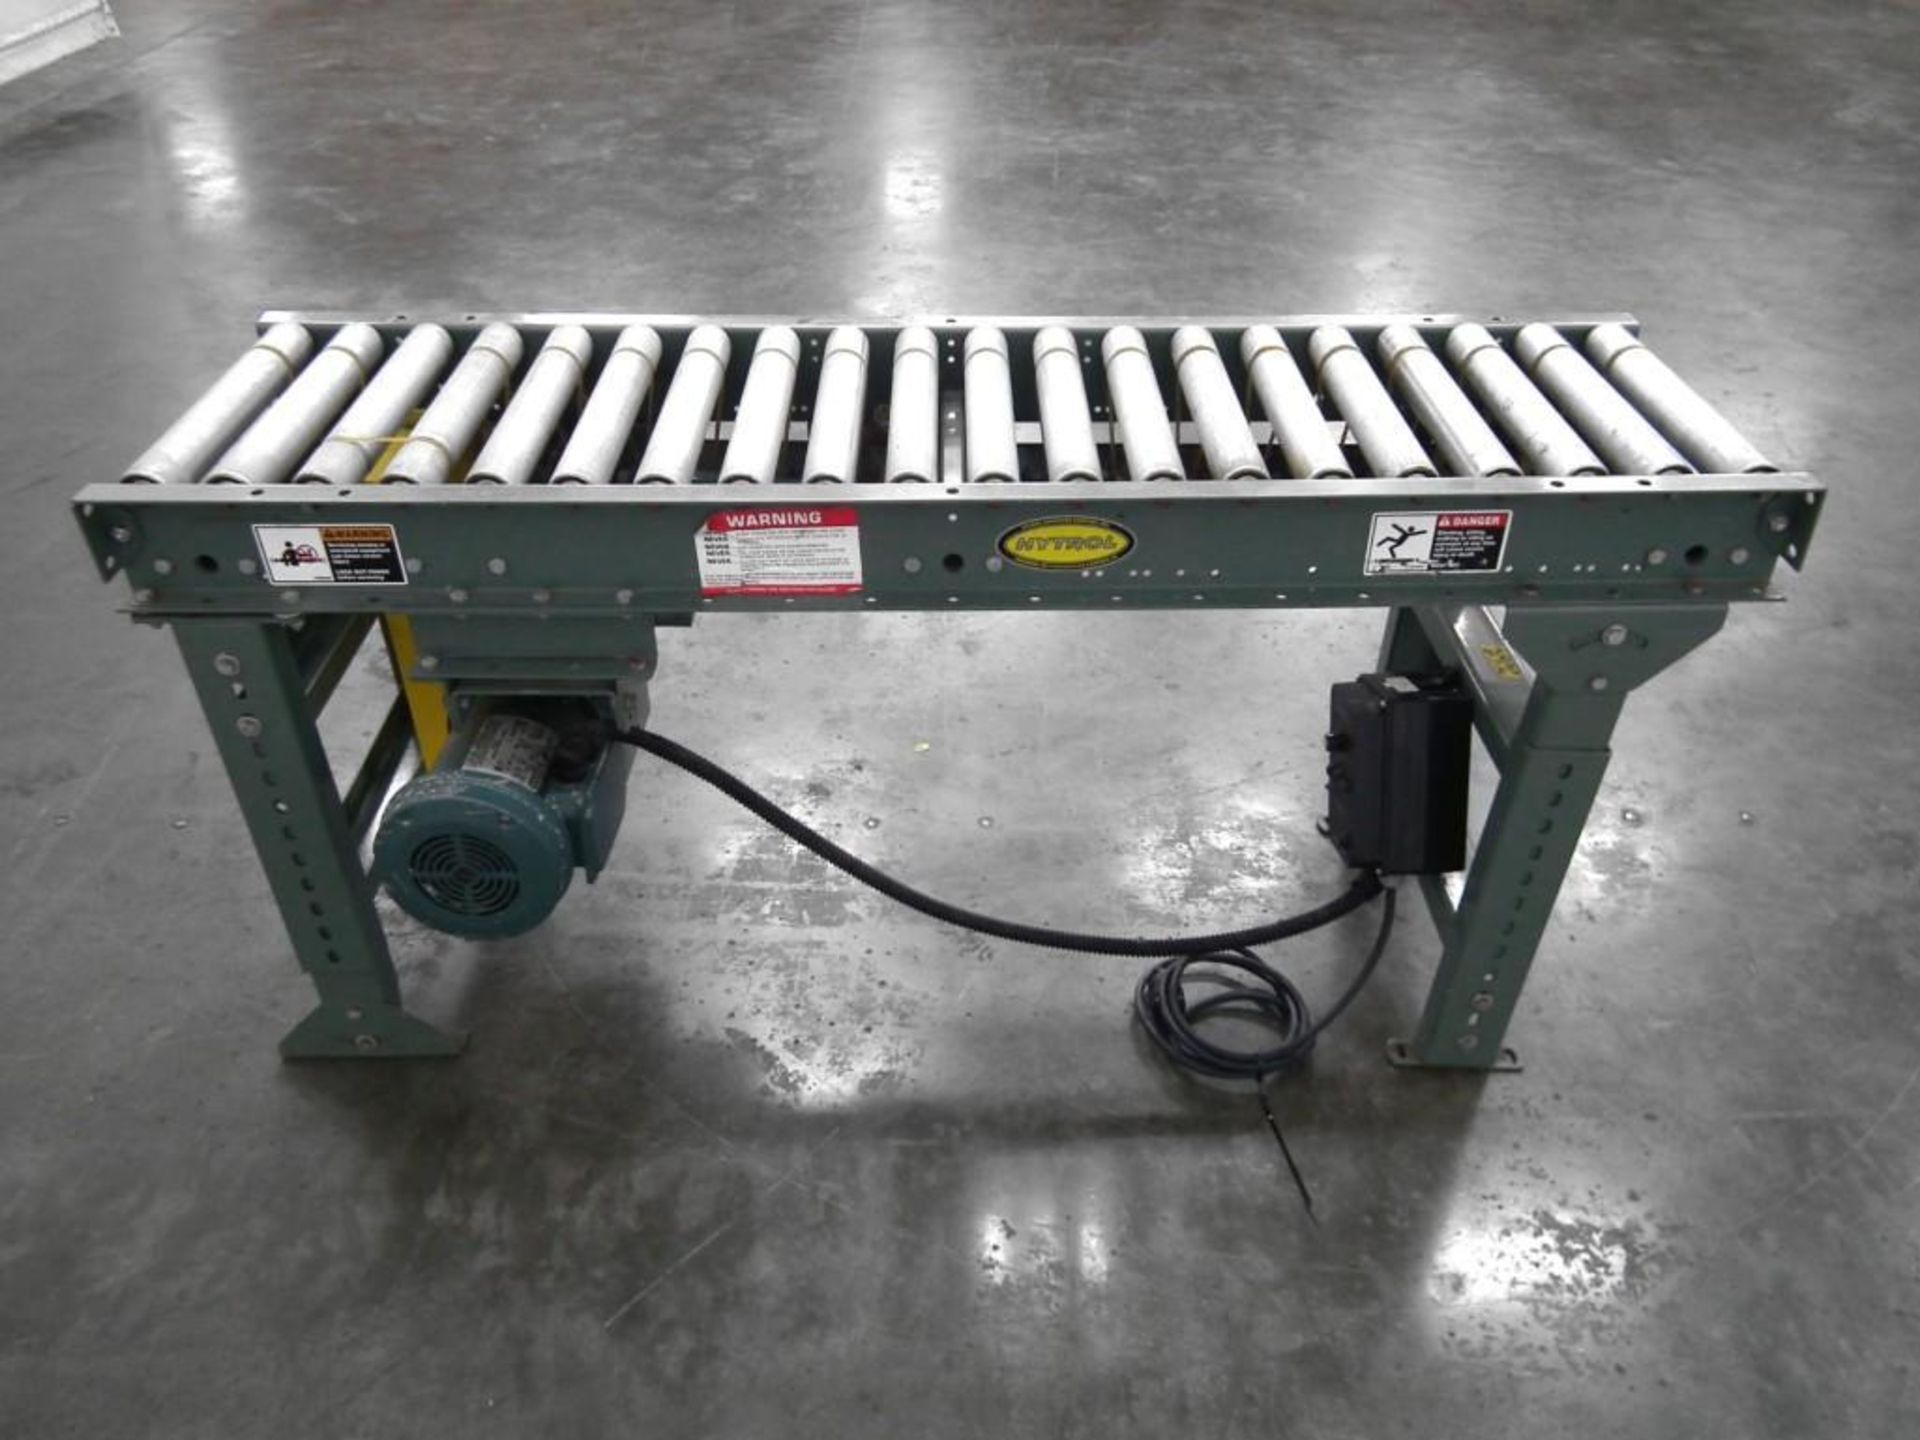 Hytrol 14 Inches Wide x 62 Inches Long Conveyor - Image 5 of 13